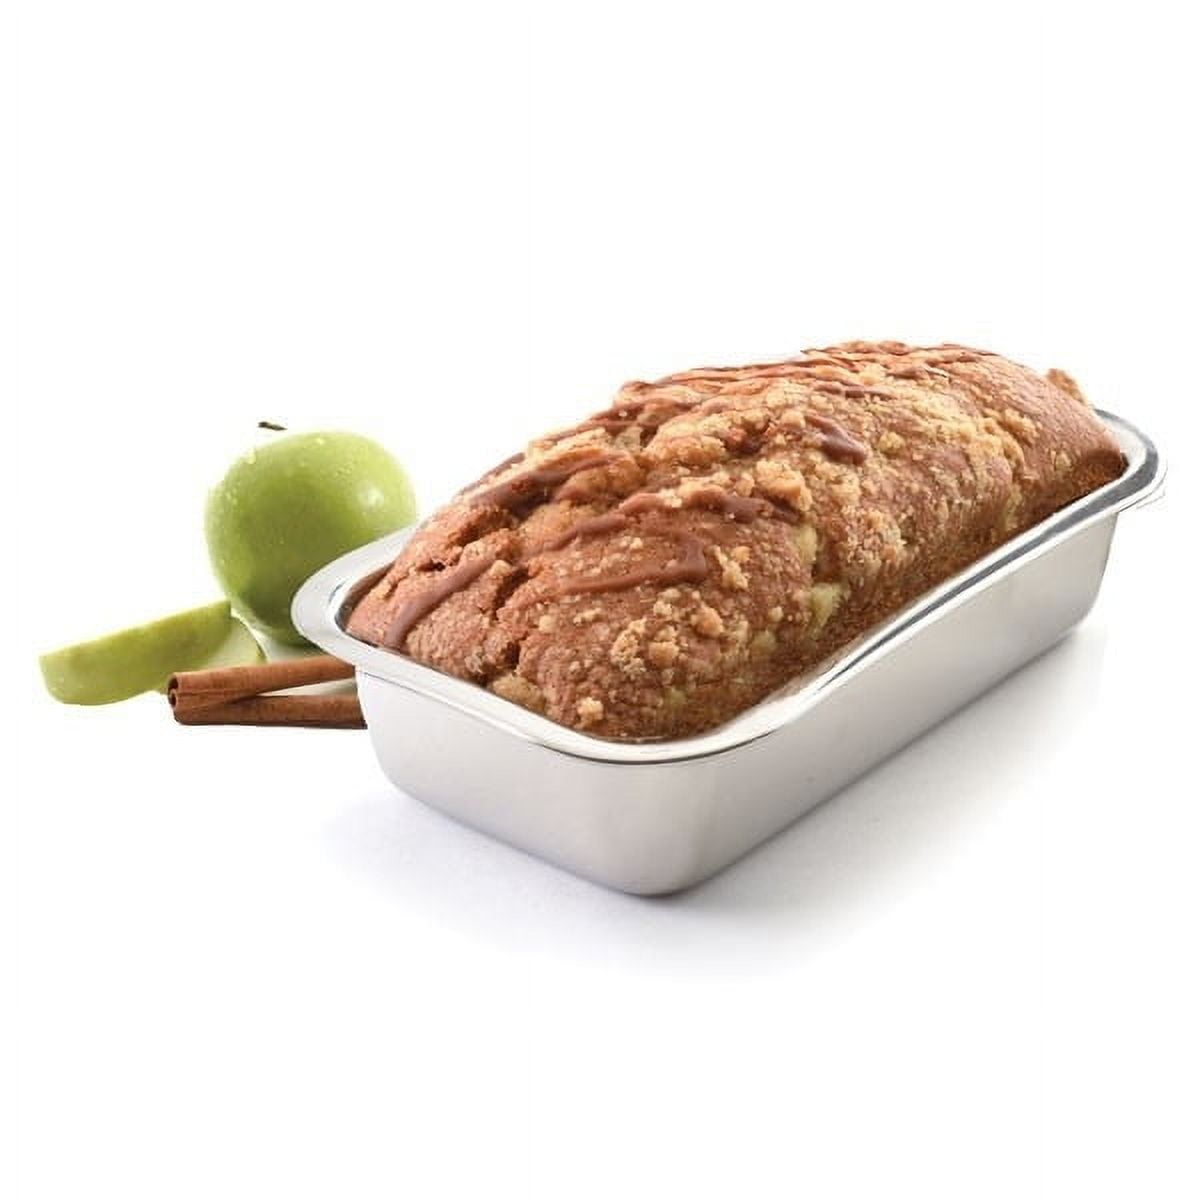 Norpro Extra Large Loaf Pan 12 x 4.5 x 3